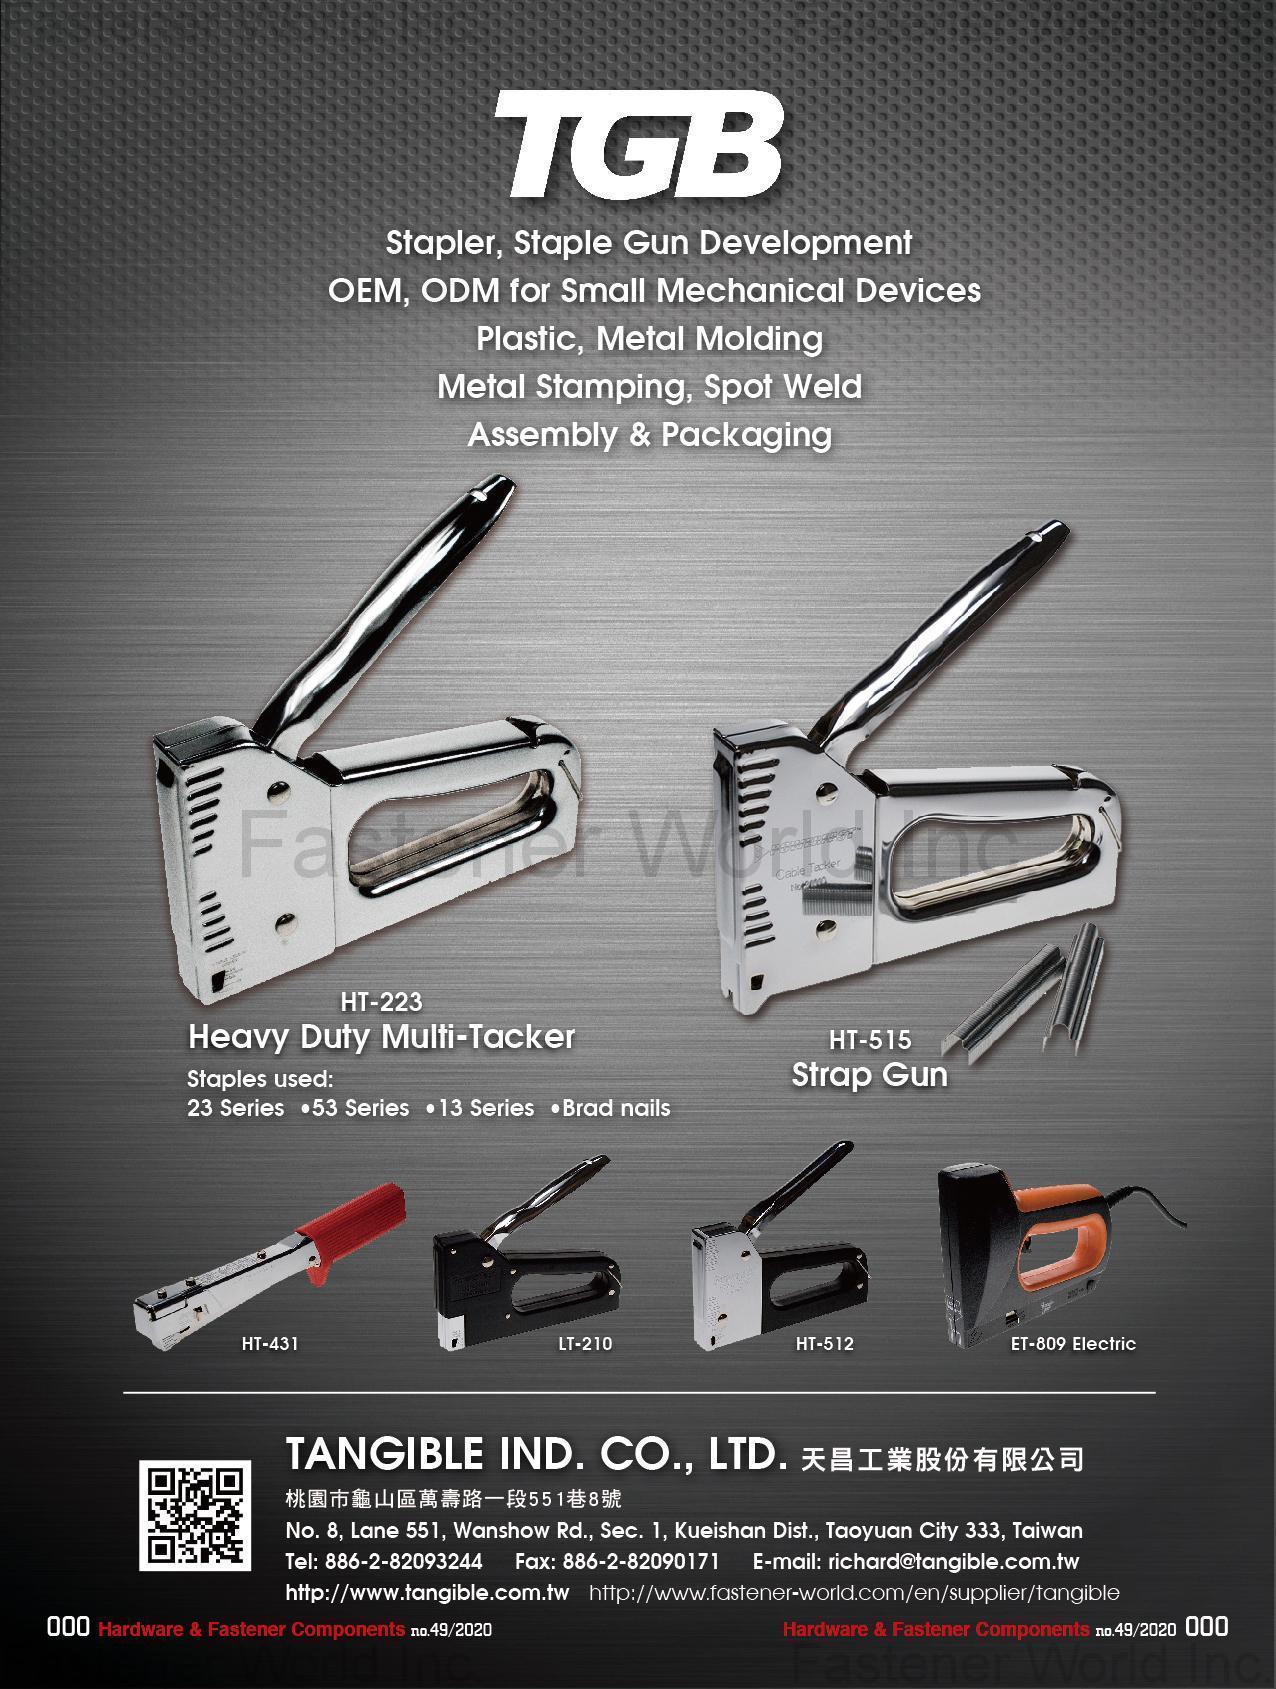 TANGIBLE IND. CO., LTD. , Stapler, Staple Gun Development OEM, ODM for Small Mechanical Devices Plastic, Metal Molding Metal Stamping, Spot Weld Assembly & Packaging, Heavy Duty Multi-Tacker, Strap Gun , Air Tackers/air Staple Guns/air Nailing Tools